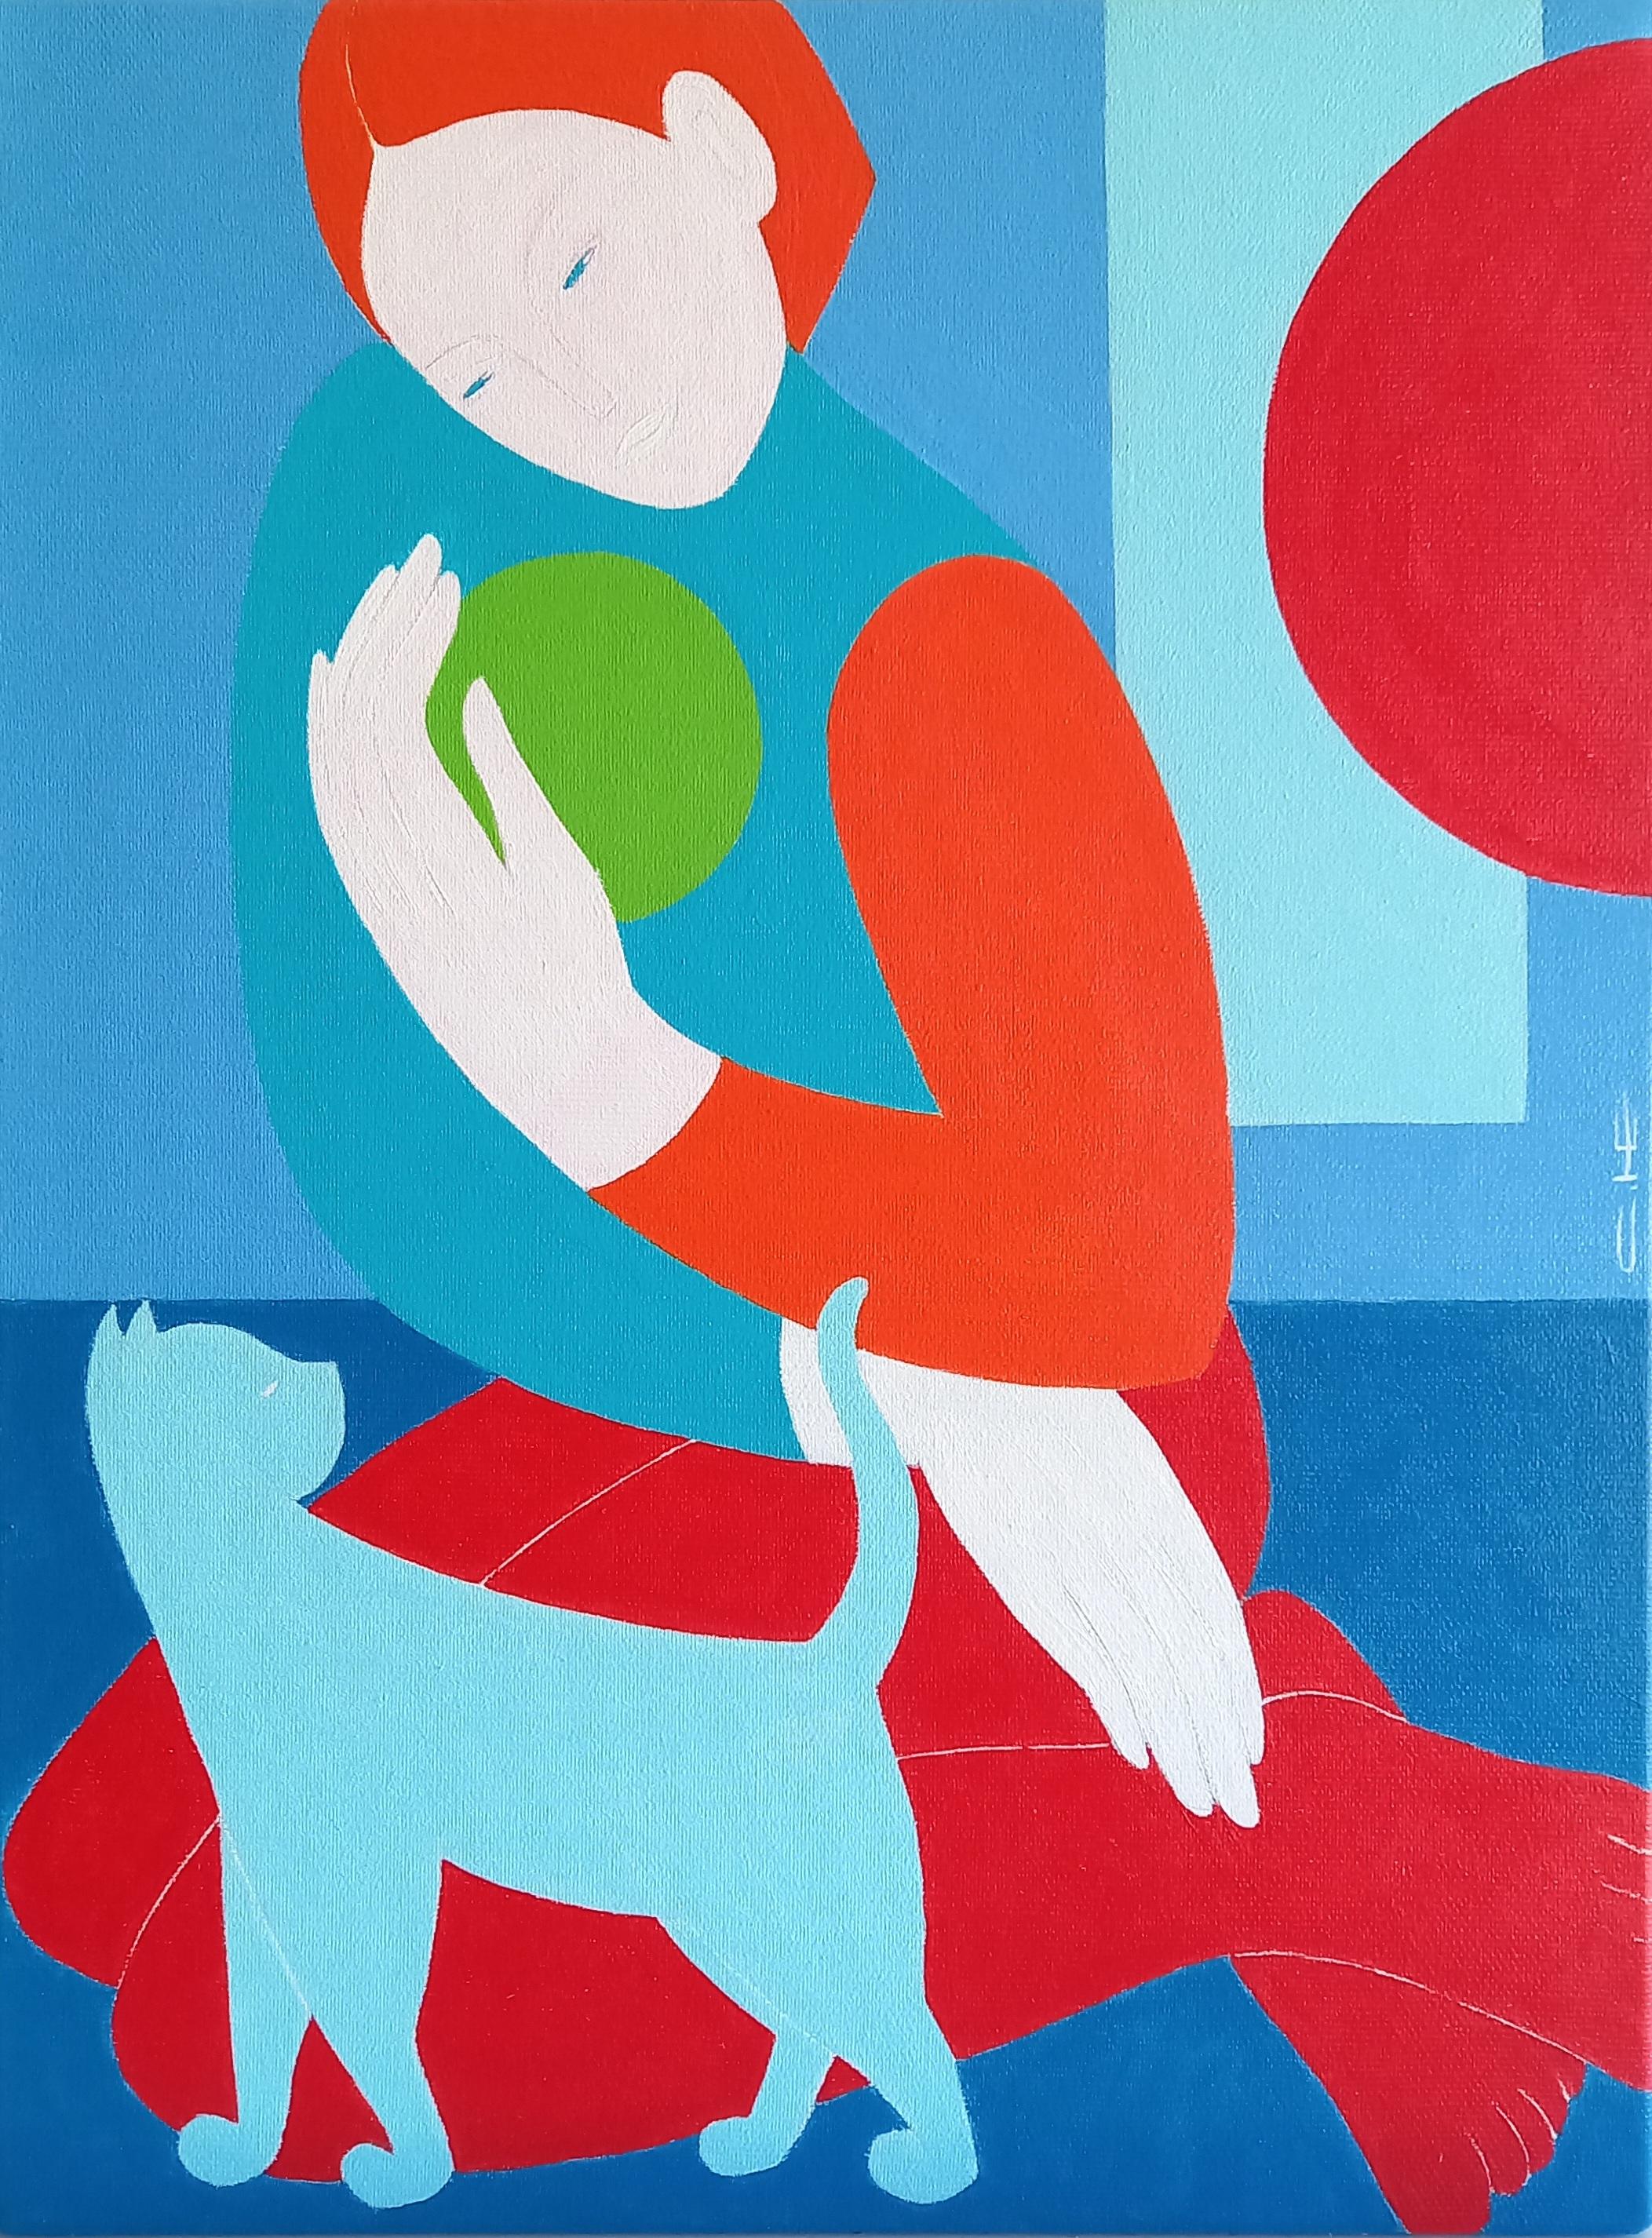 Girl in red tights and blue cat, 40x30cm - Painting by Sasha Katinauskiene